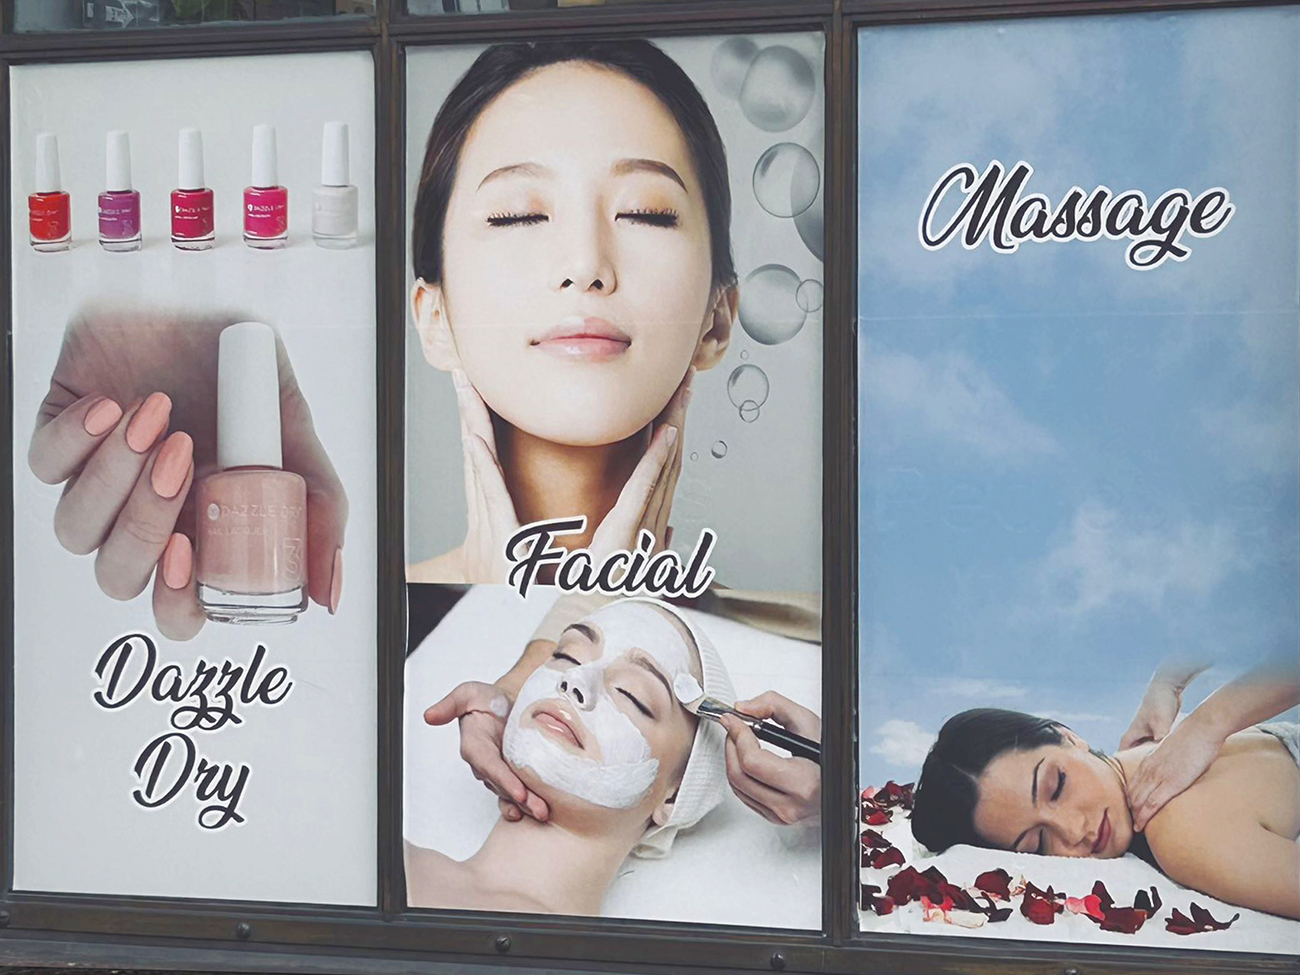 Out door Manicure, Facial and Massage poster in the window